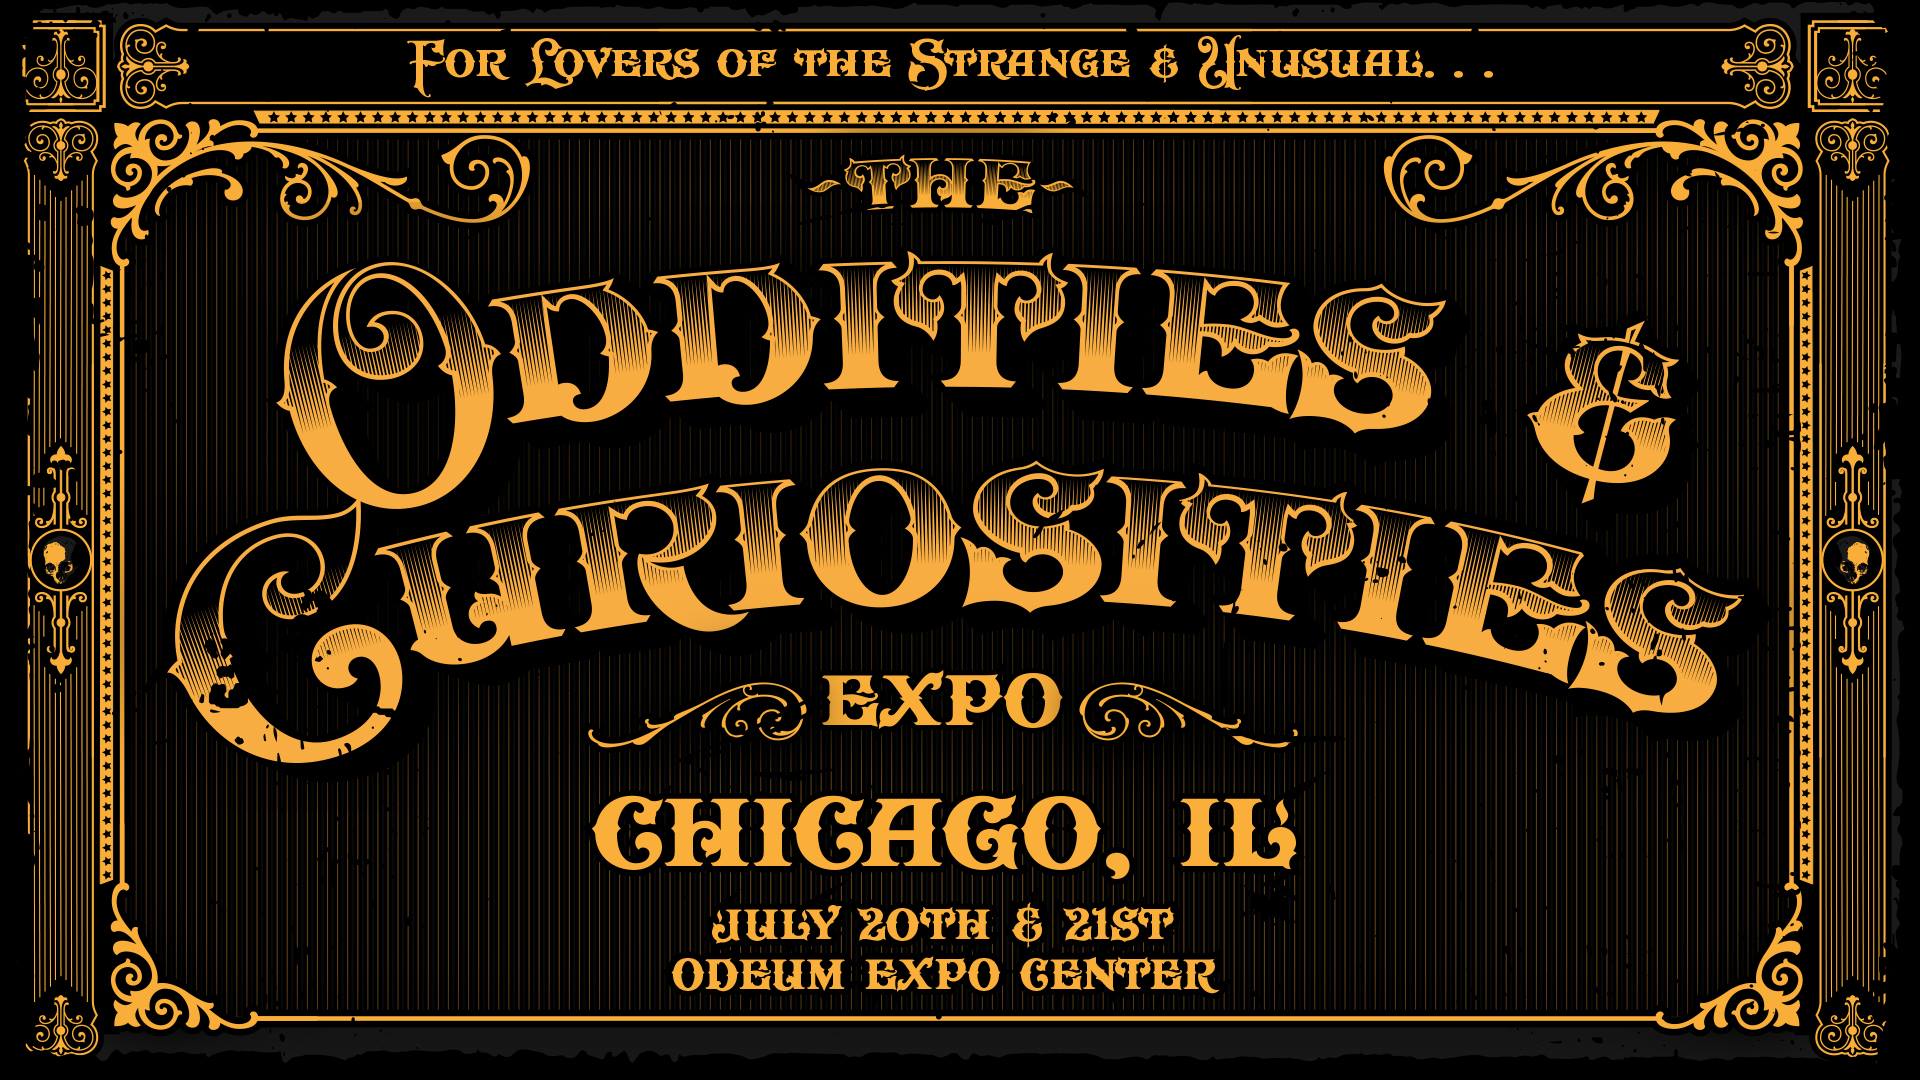 oddities and curiosities expo charlotte